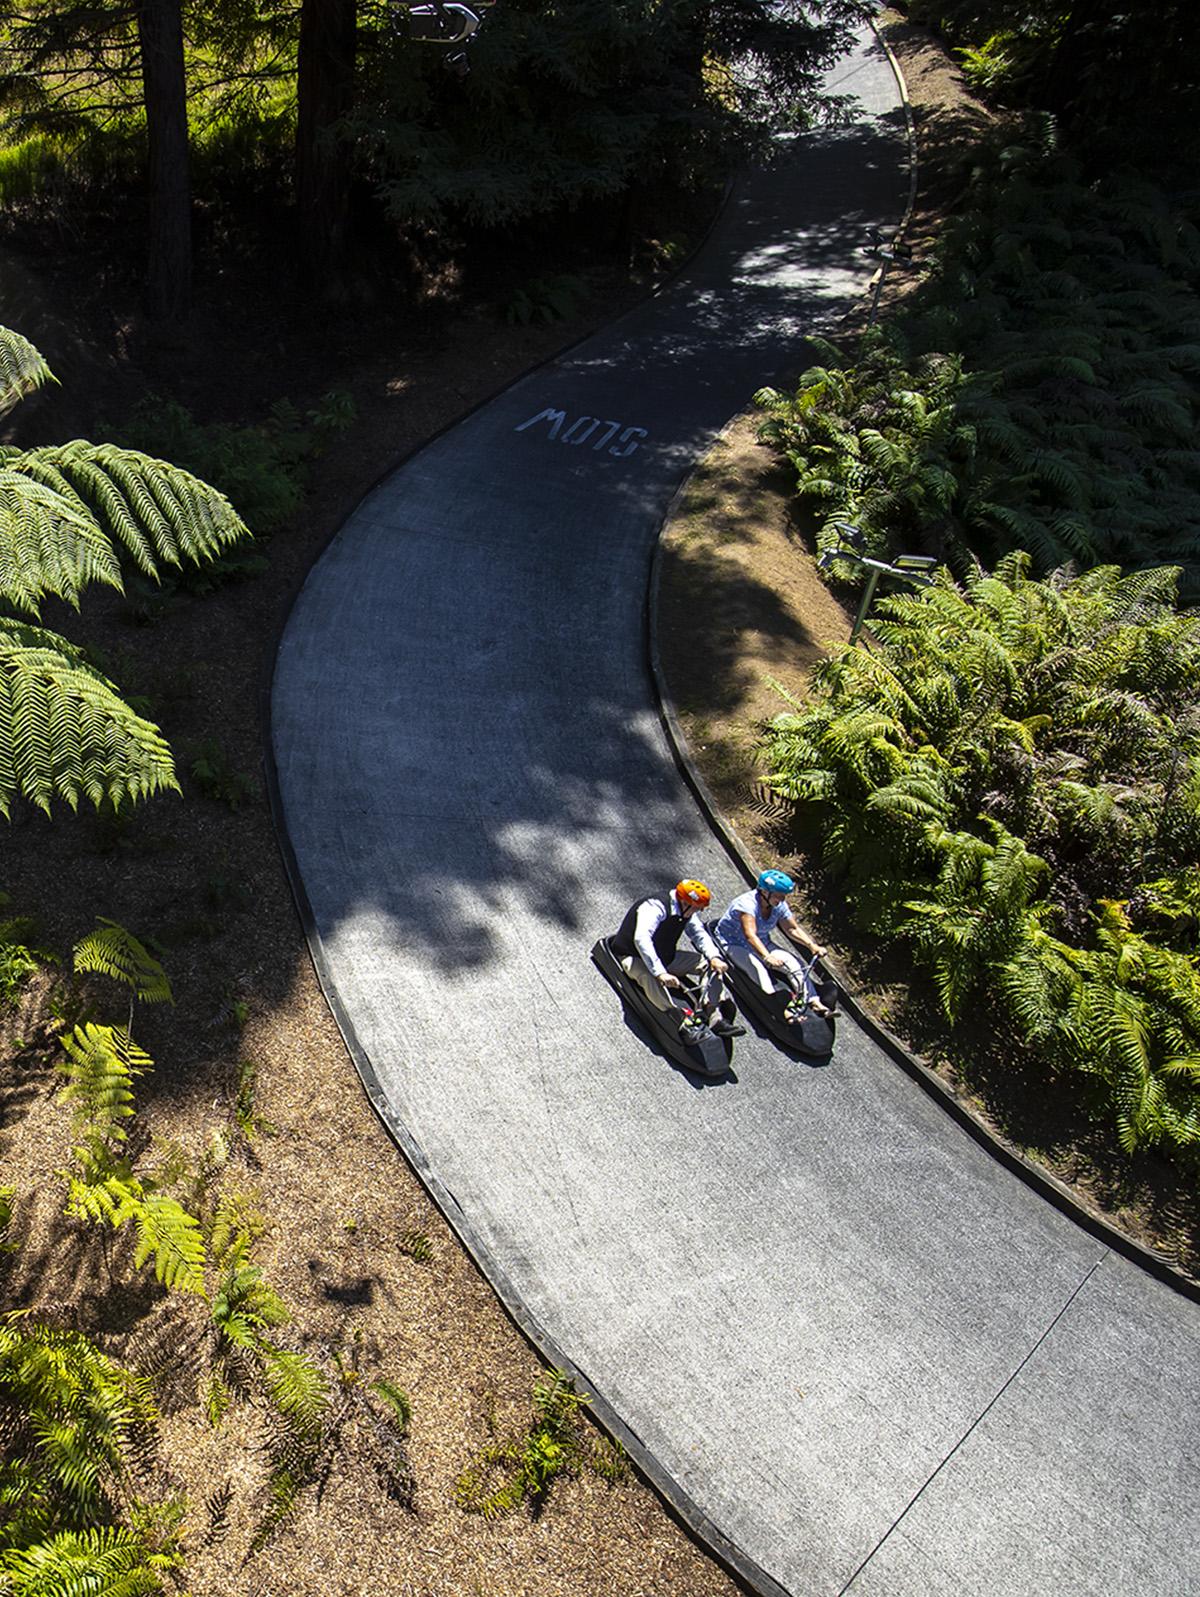 Aerial view of two people going down the Rotorua luge track